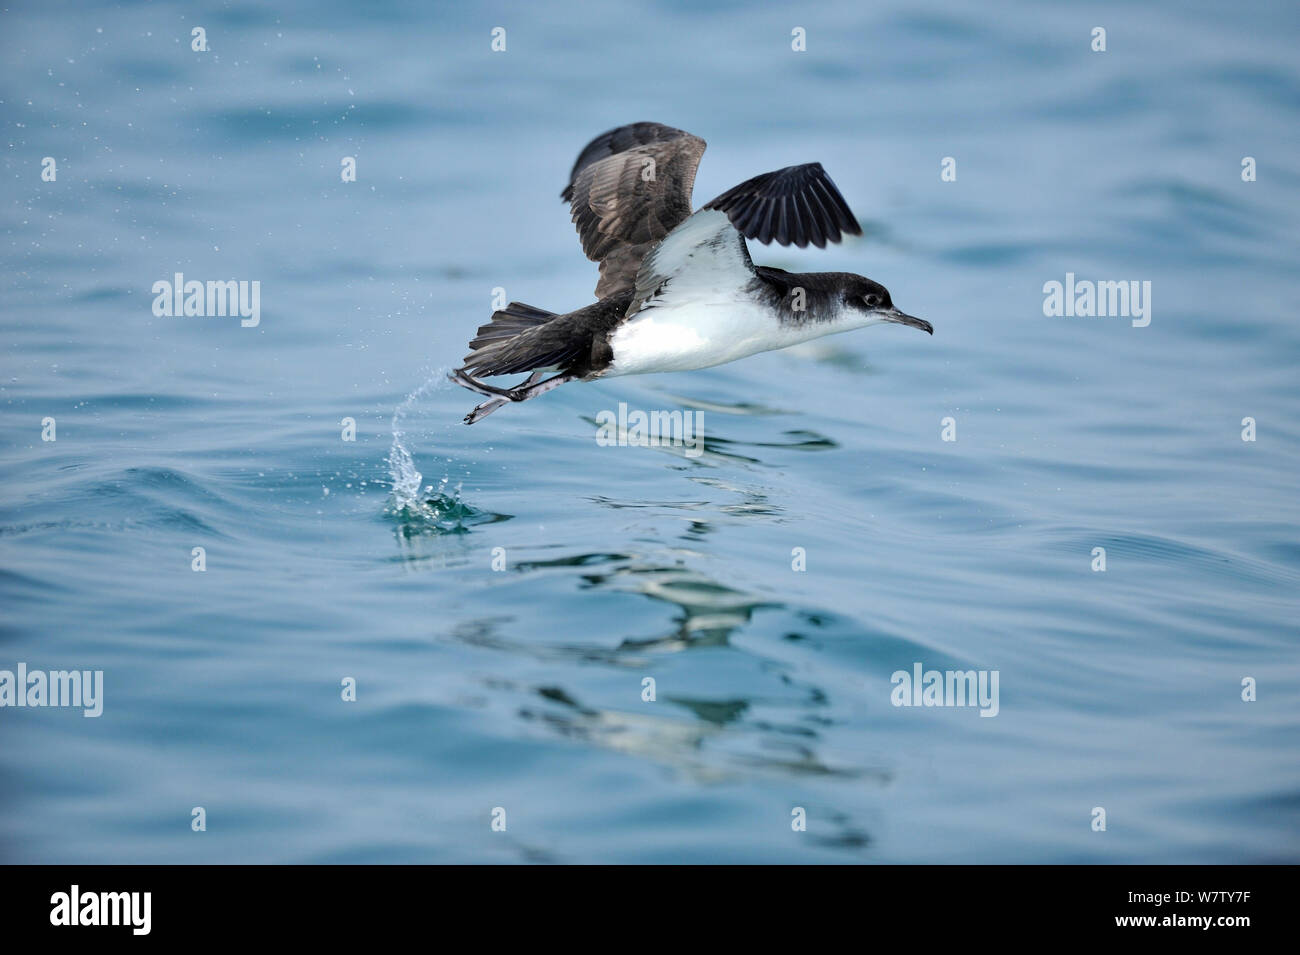 Manx Shearwater (Puffinus puffinus) taking off from calm sea, south coast of Anglesey, North Wales, UK. Stock Photo